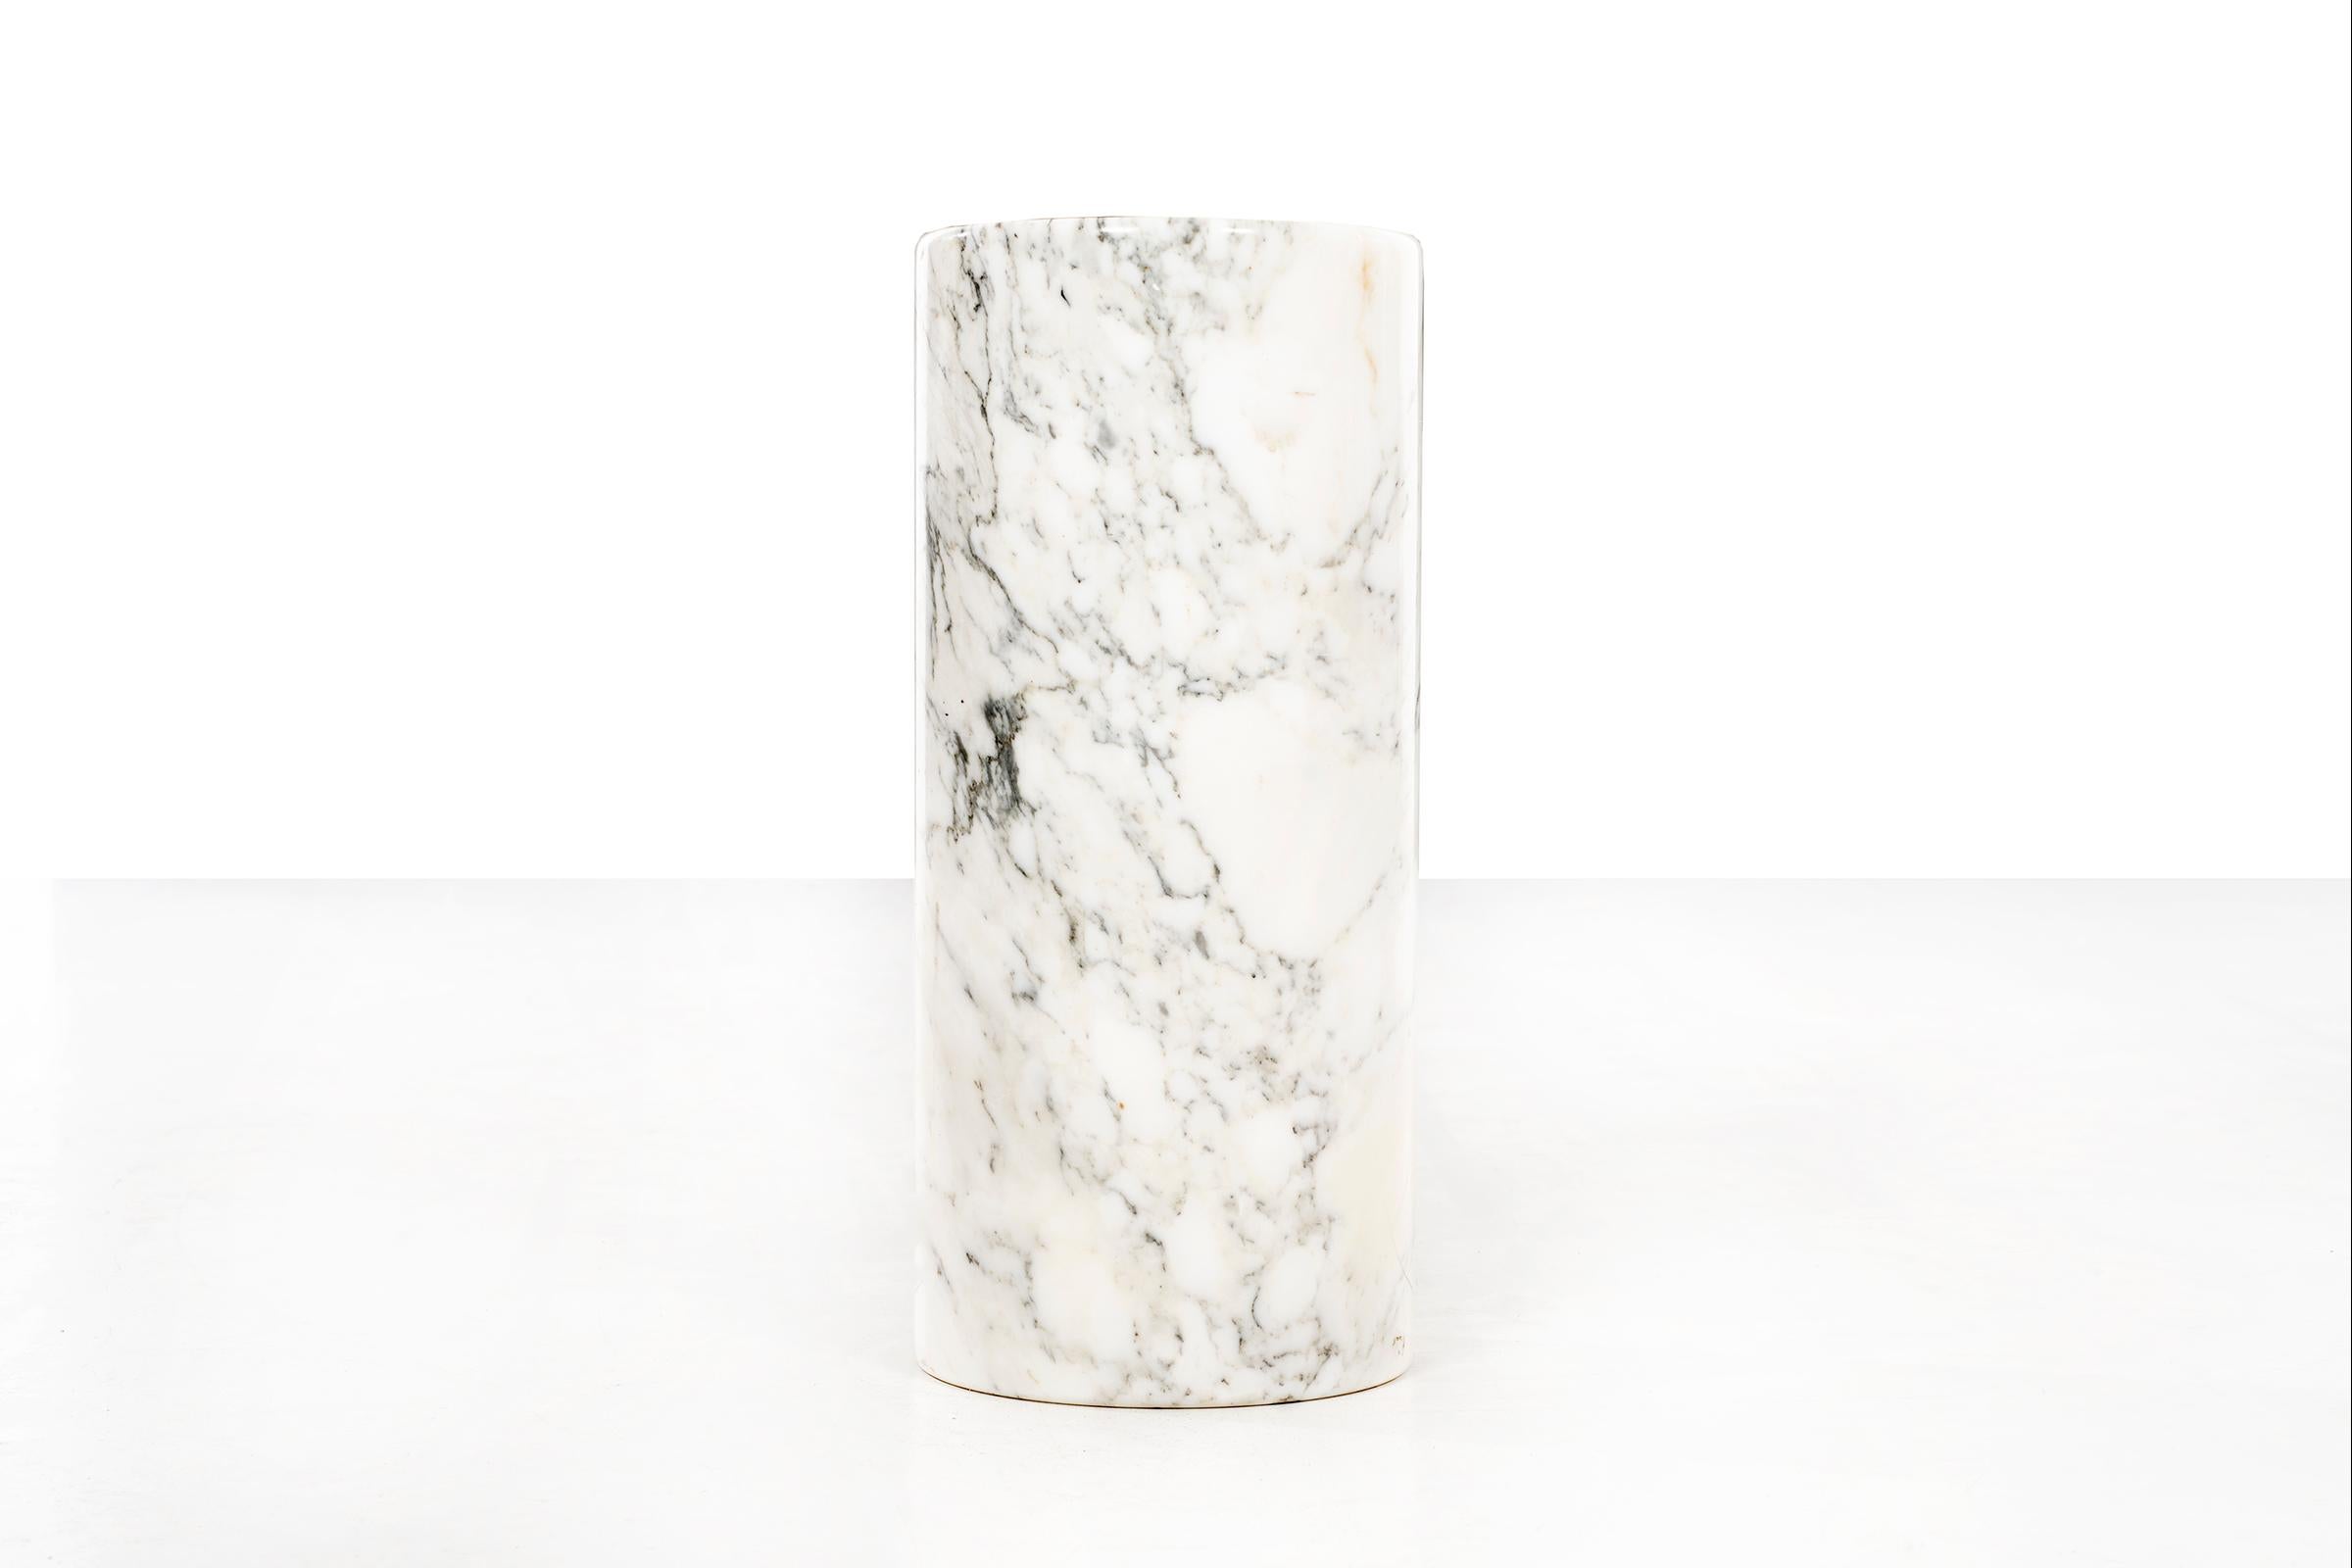 Hugh Acton Custom planter, solid Carrera marble with carved concave top.
Polished Carrera marble.
Signed on underside [acton].

 